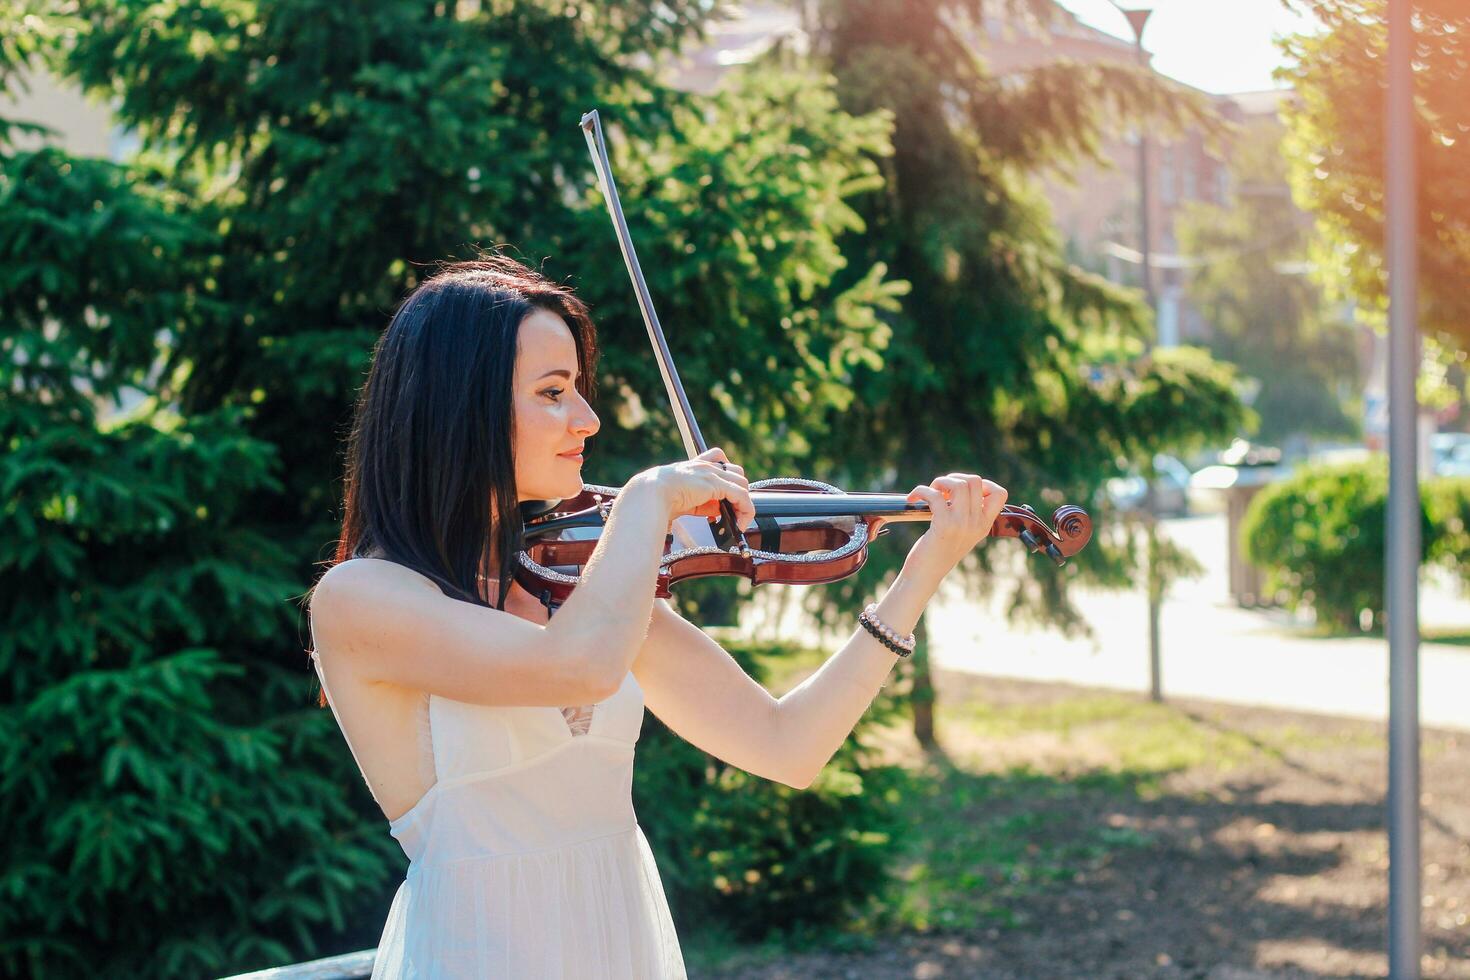 Woman artist with dark hair in a dress plays a wooden concert electric violin photo